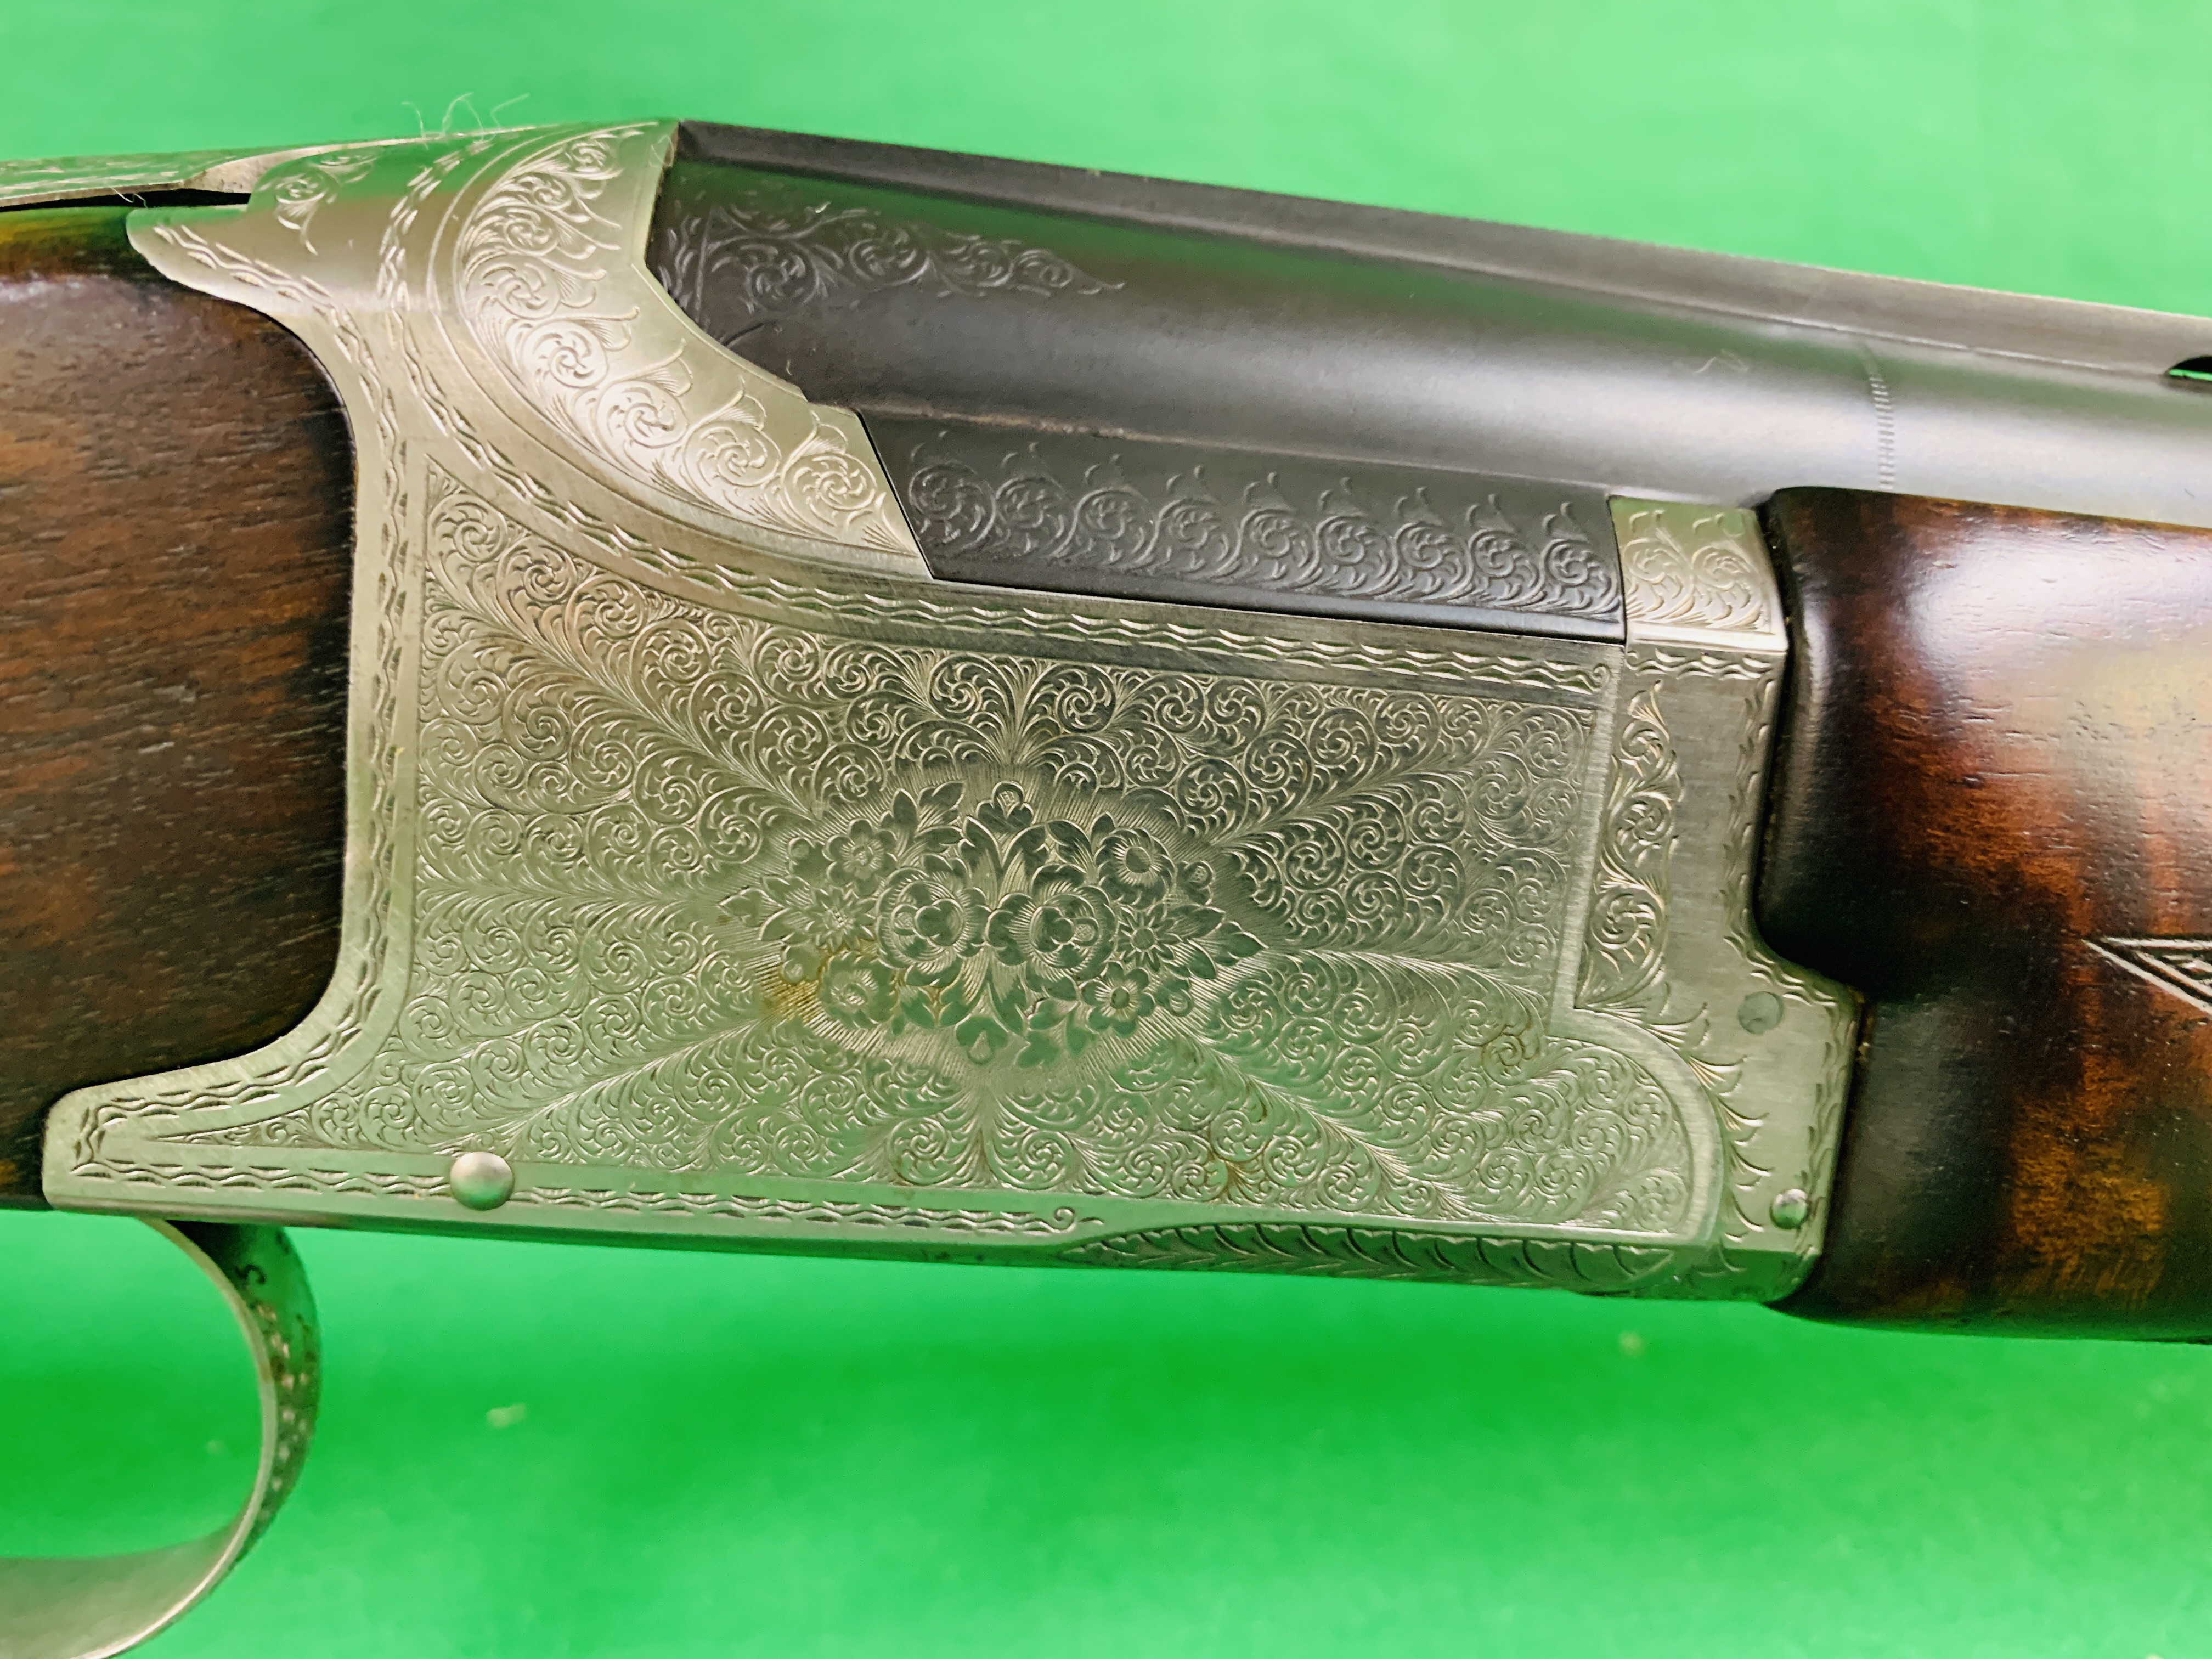 WINCHESTER GRAND EUROPEAN 12 BORE OVER AND UNDER SHOTGUN # 434503 IN HARD TRANSIT CASE COMPLETE - Image 3 of 12